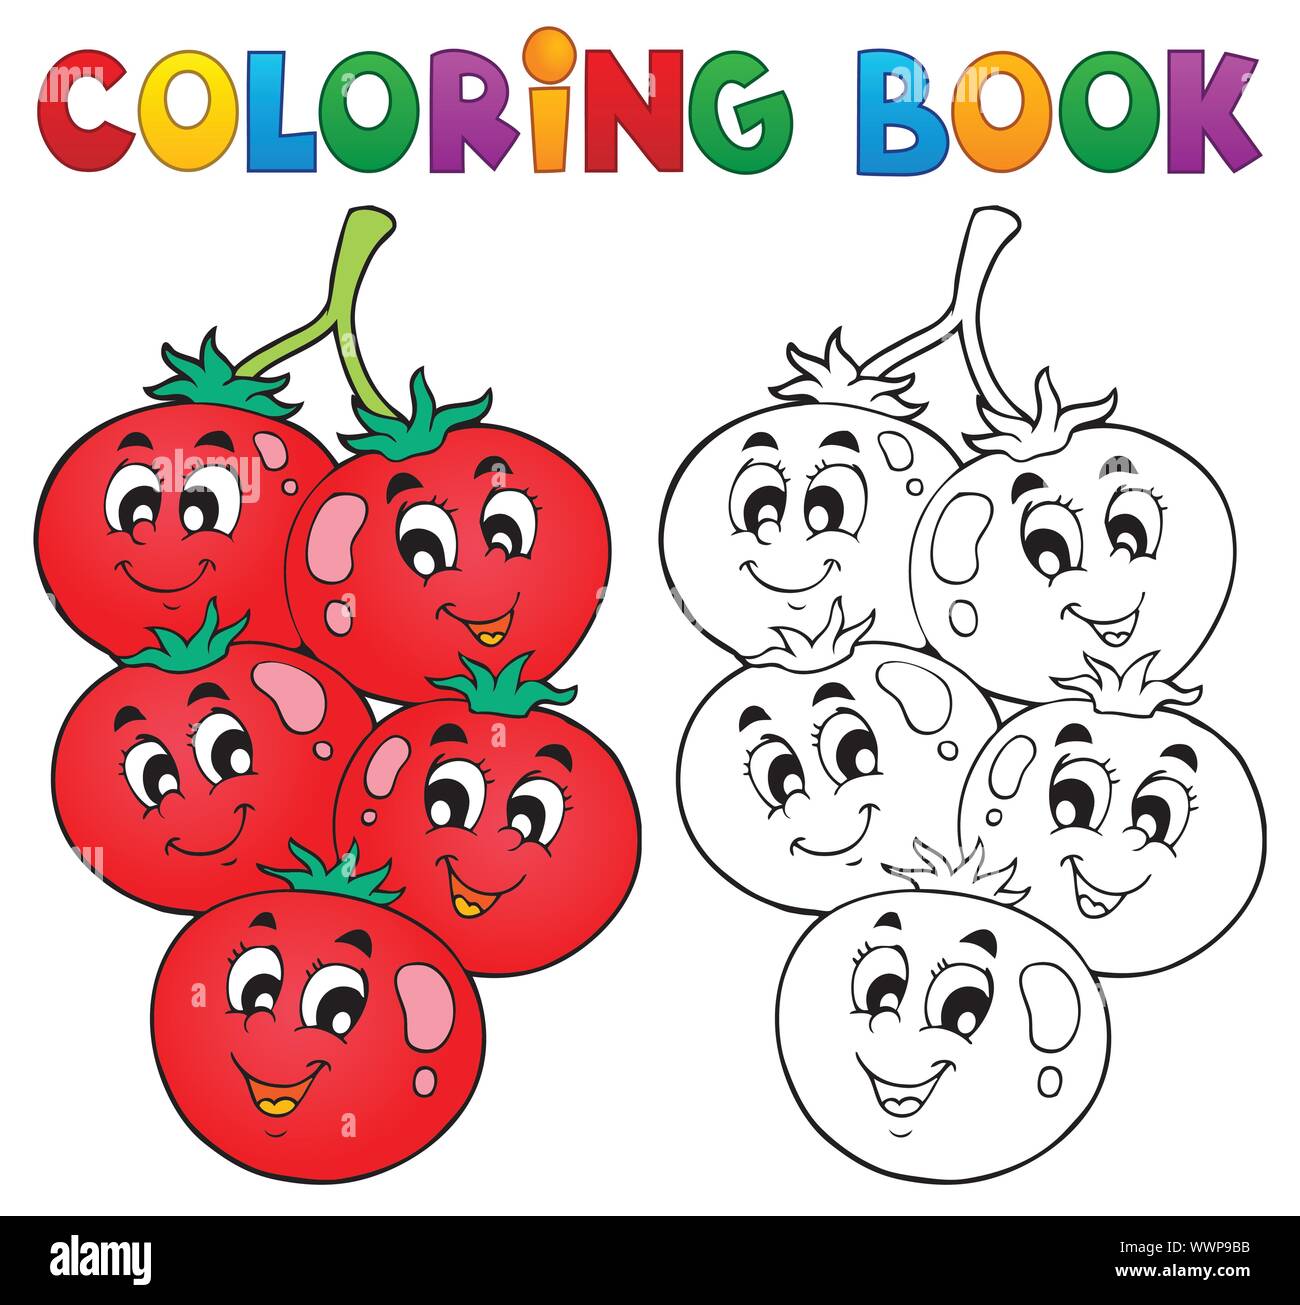 Coloring book vegetable theme 3 Stock Vector